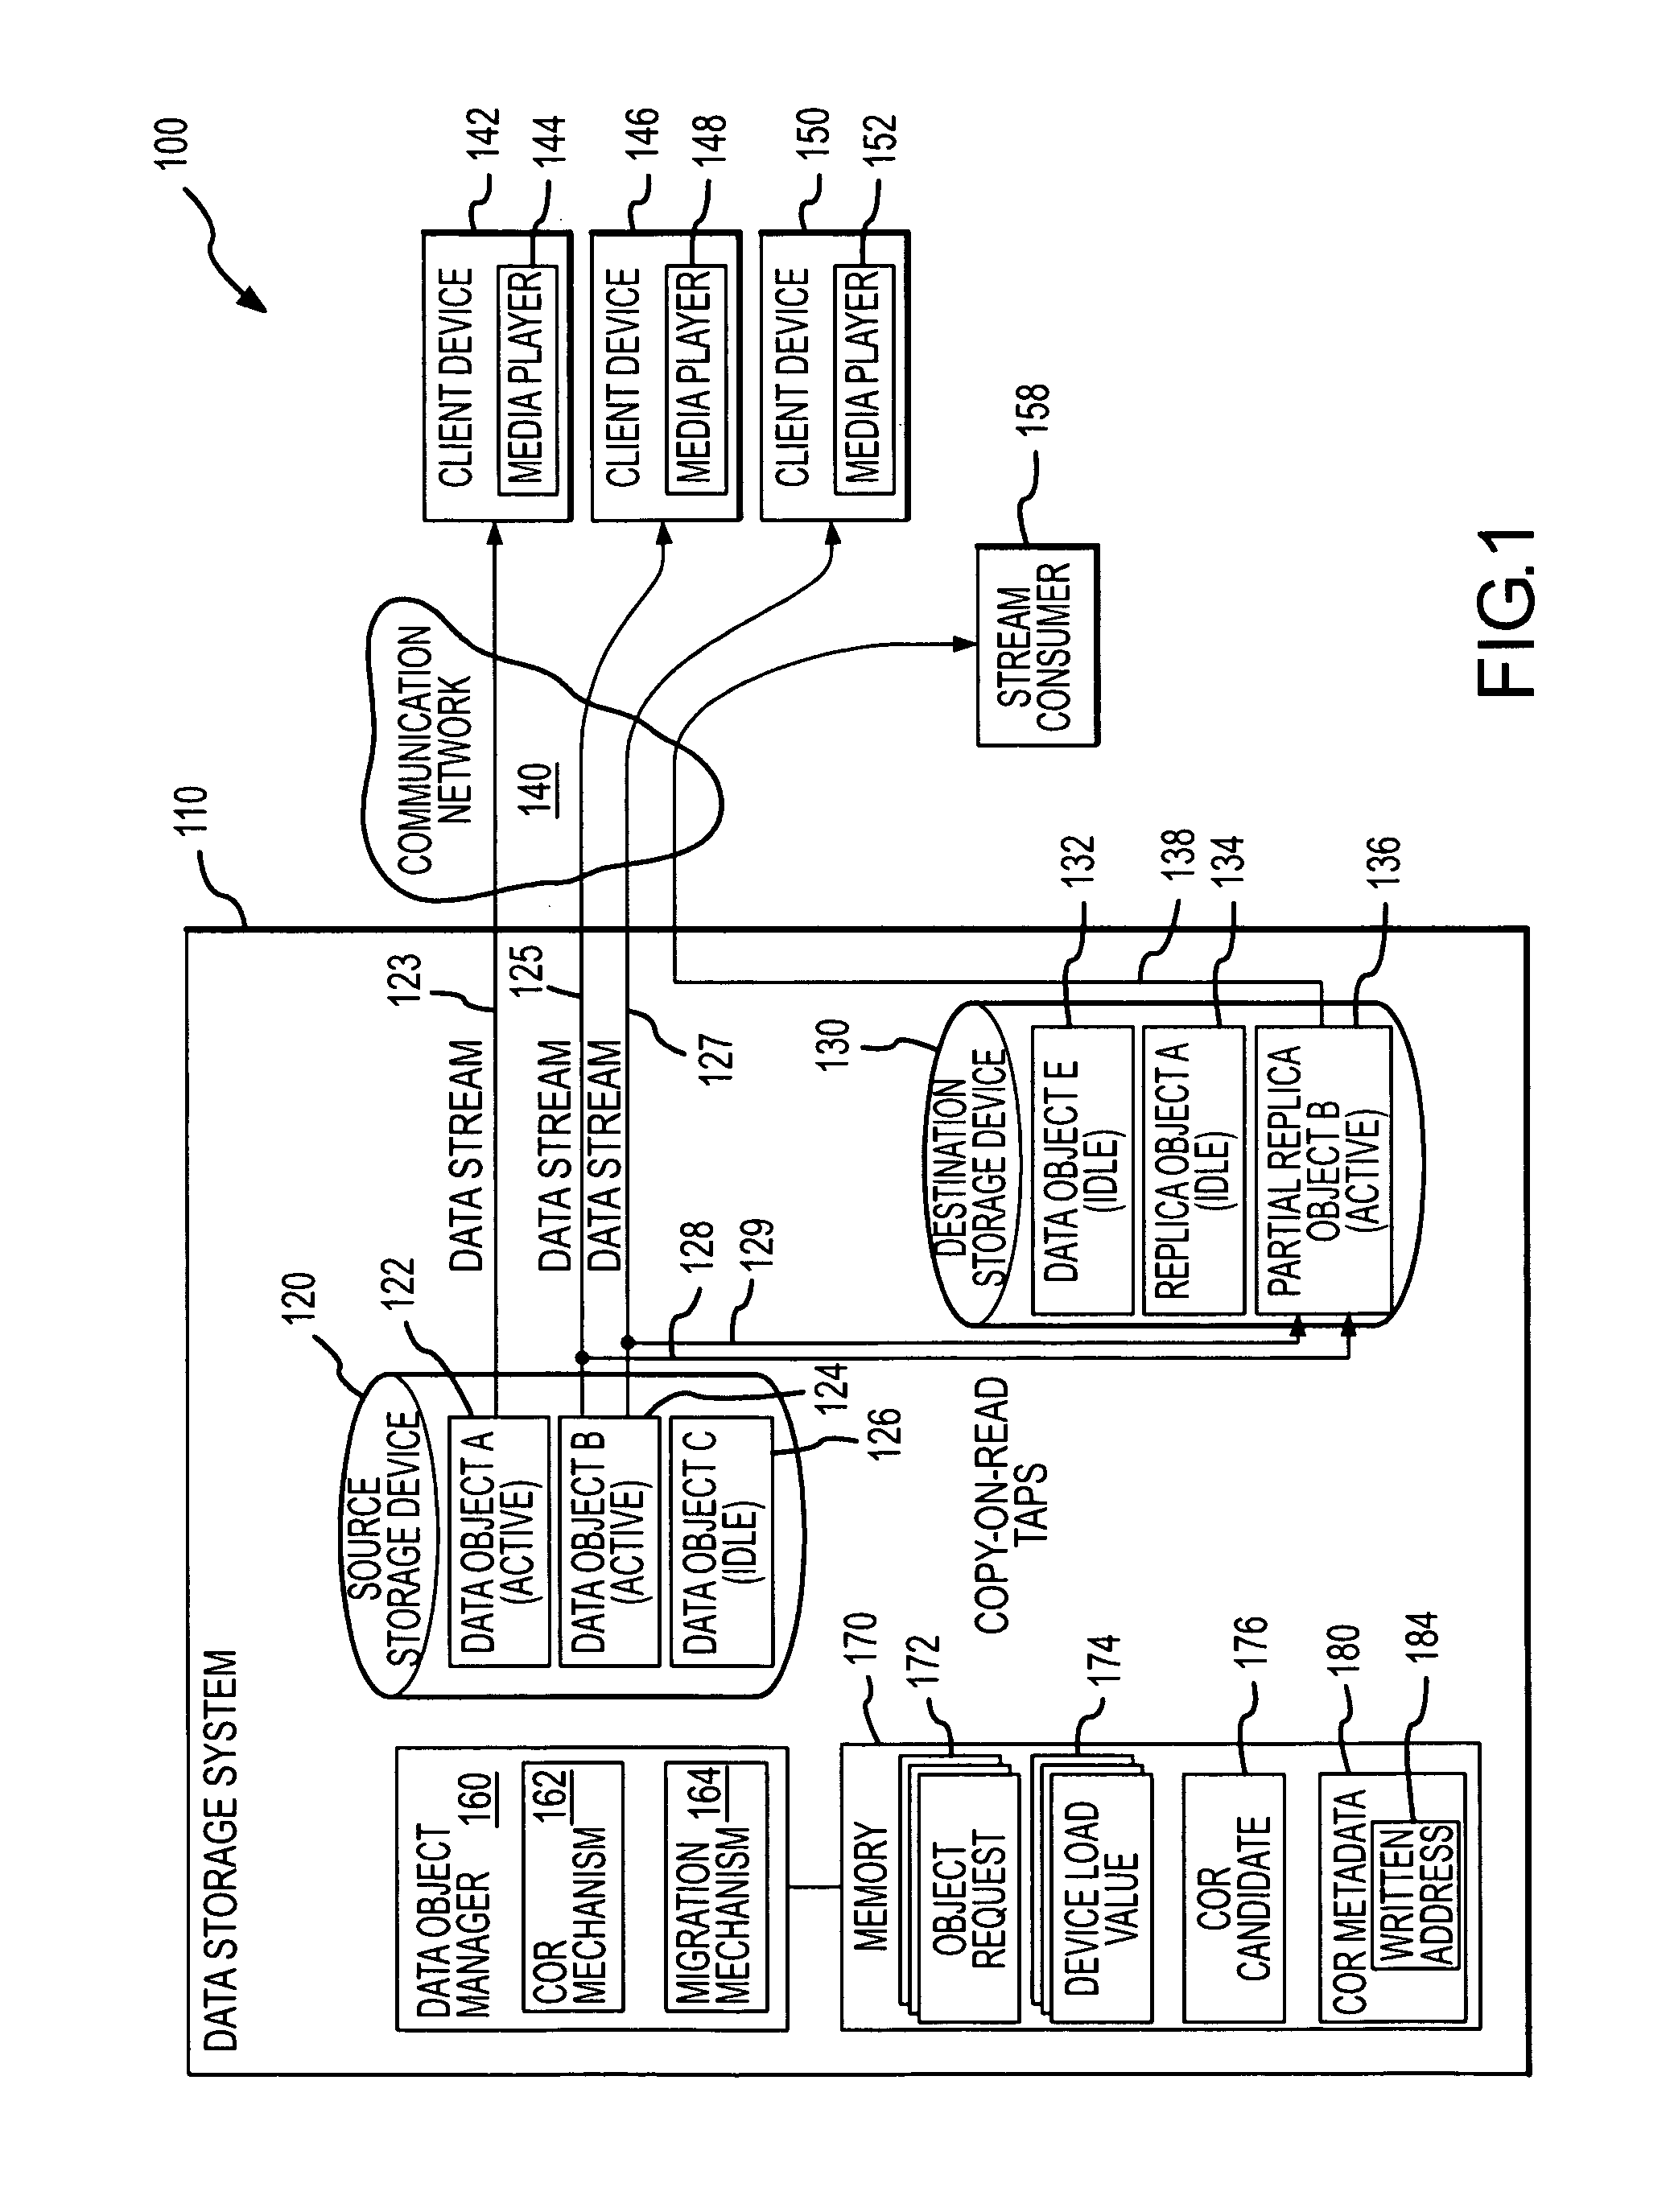 Dynamic creation of replicas of streaming data from a storage device without added load